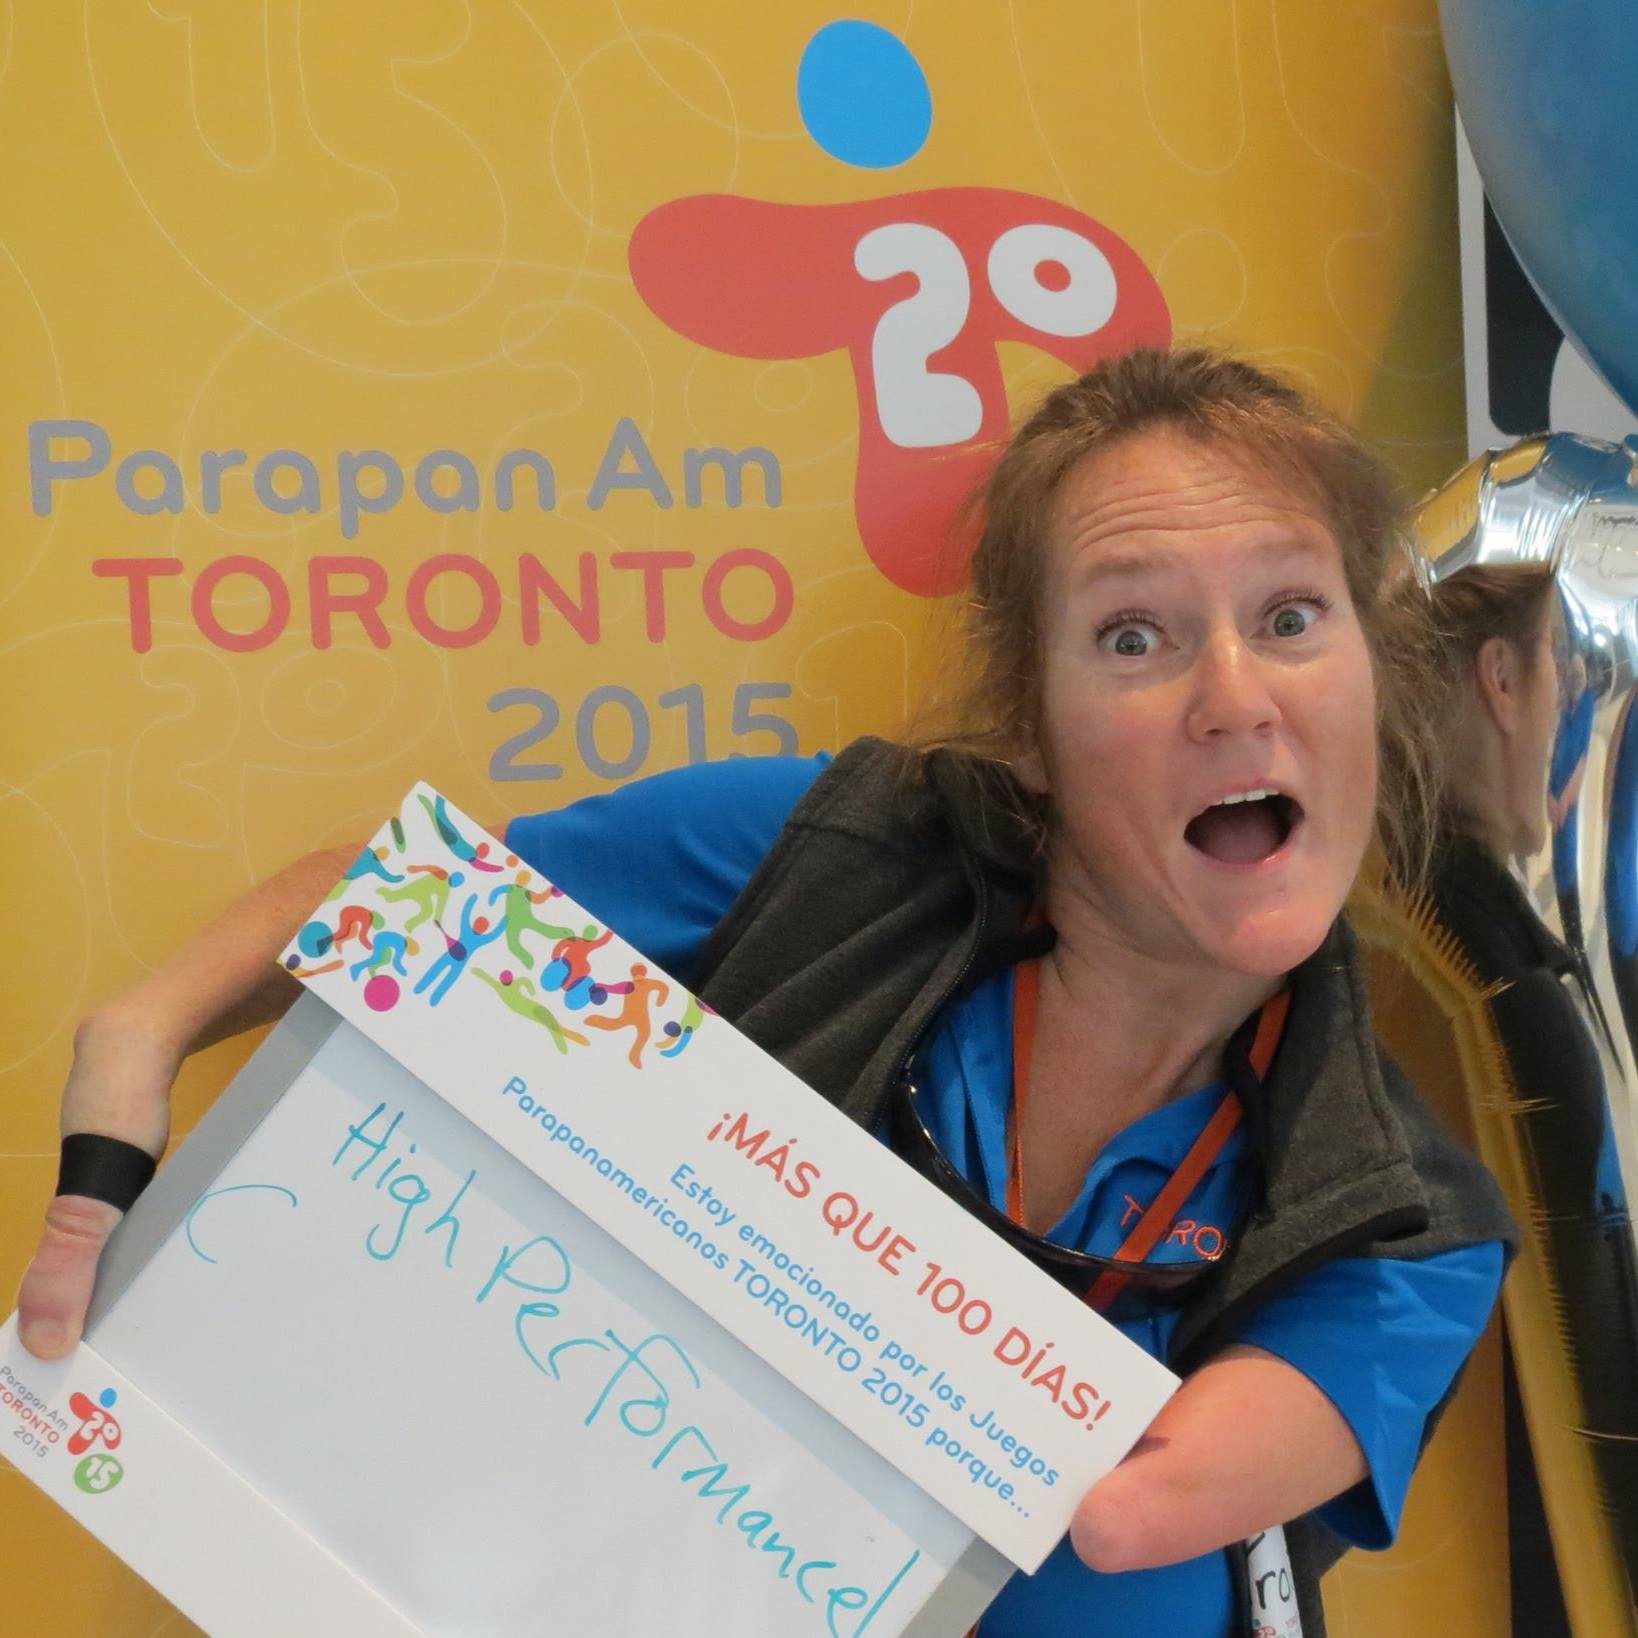 Tracy Schmitt holds her mouth open with an excited look on her face while standing in front of a banner for the Toronto 2015 Parapan Am Games. She’s holding a sign that reads, “High Performance.”